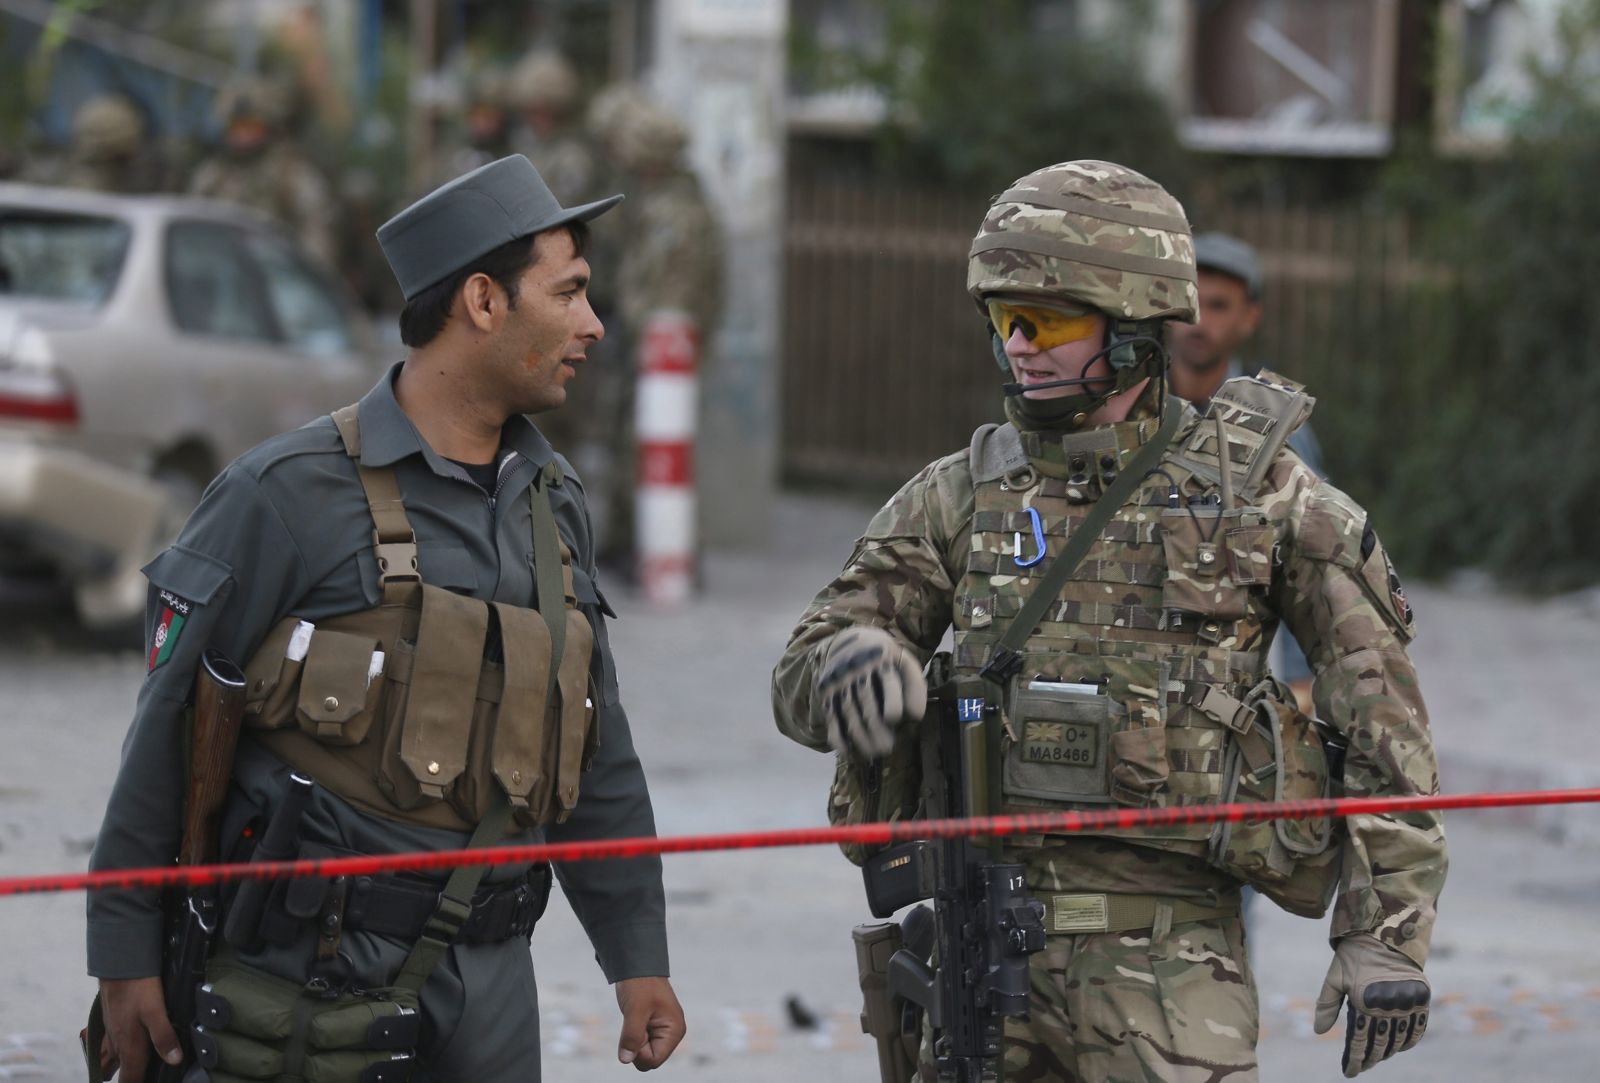 Afghan police officer and US soldier in Kabul in 2015.